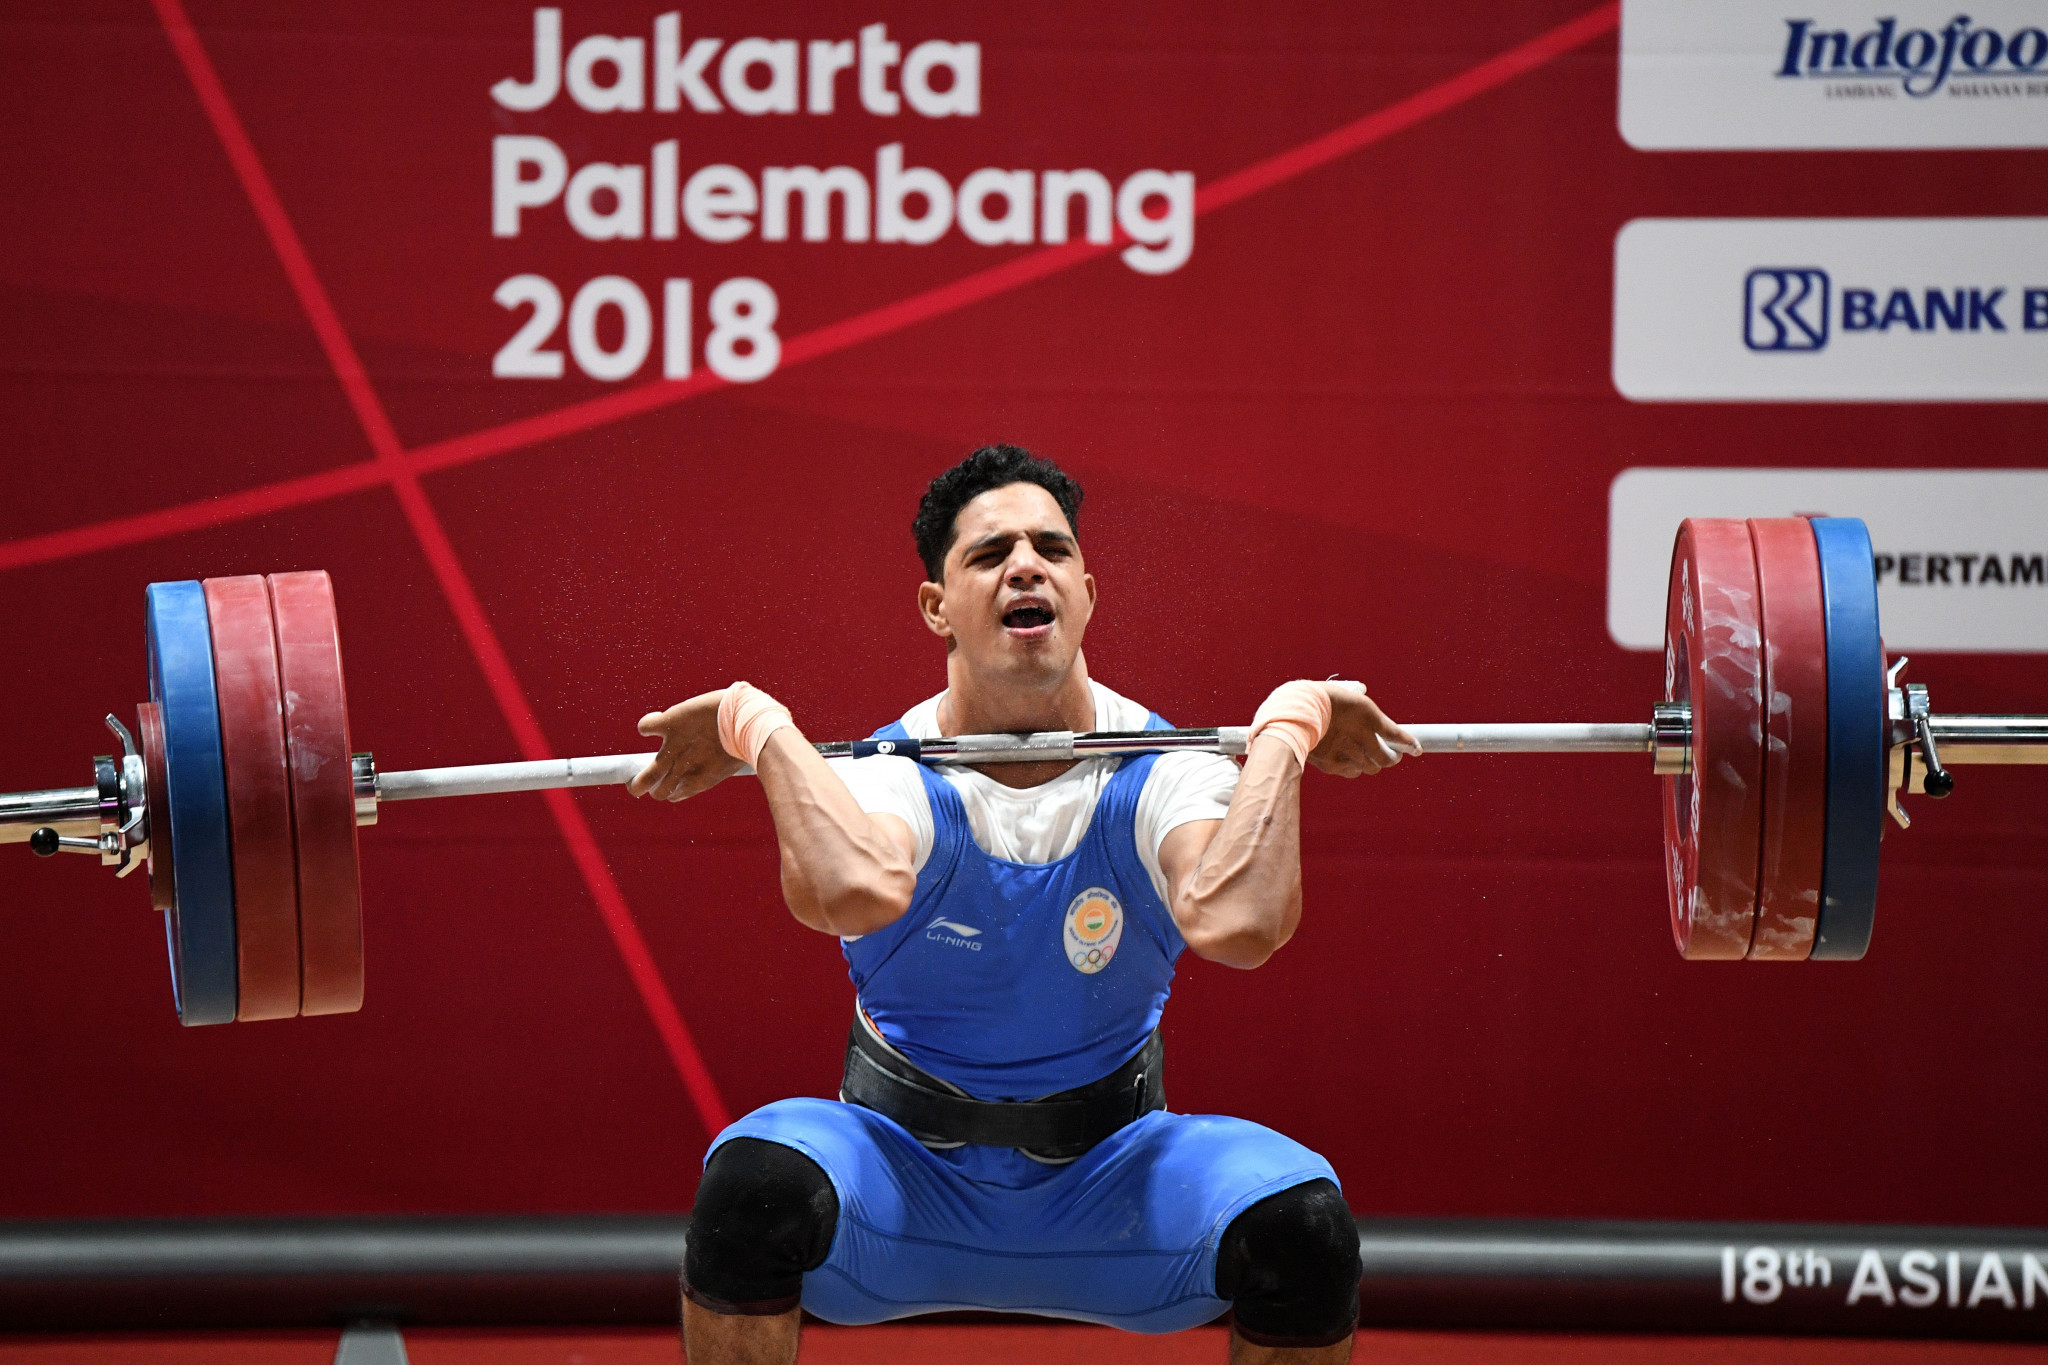 The Indian Weightlifting Federation hope the proposals will enable athletes to resume training ©Getty Images